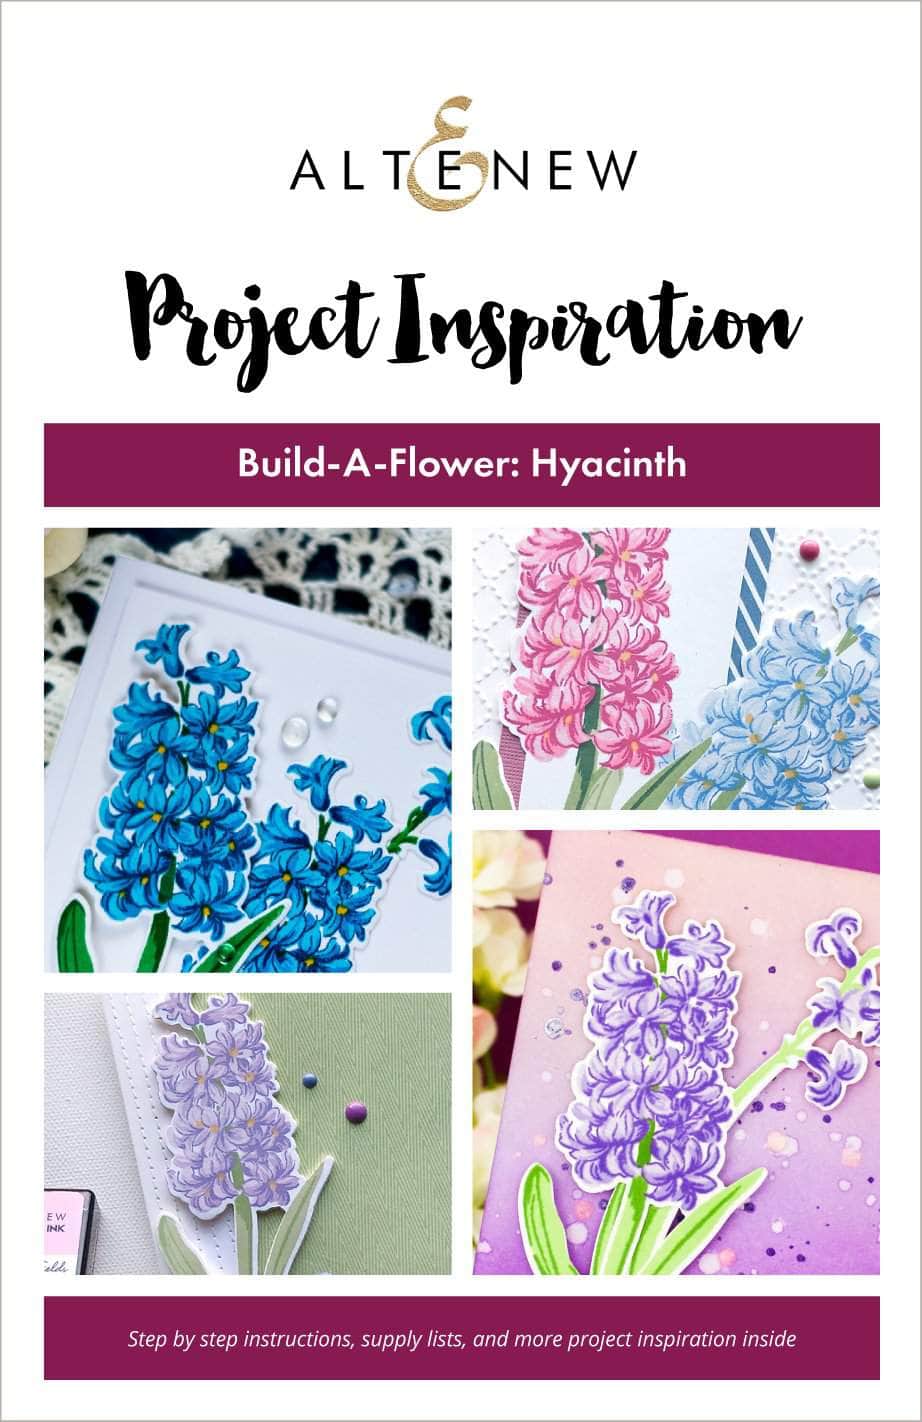 Printed Media Build-A-Flower: Hyacinth Project Inspiration Guide